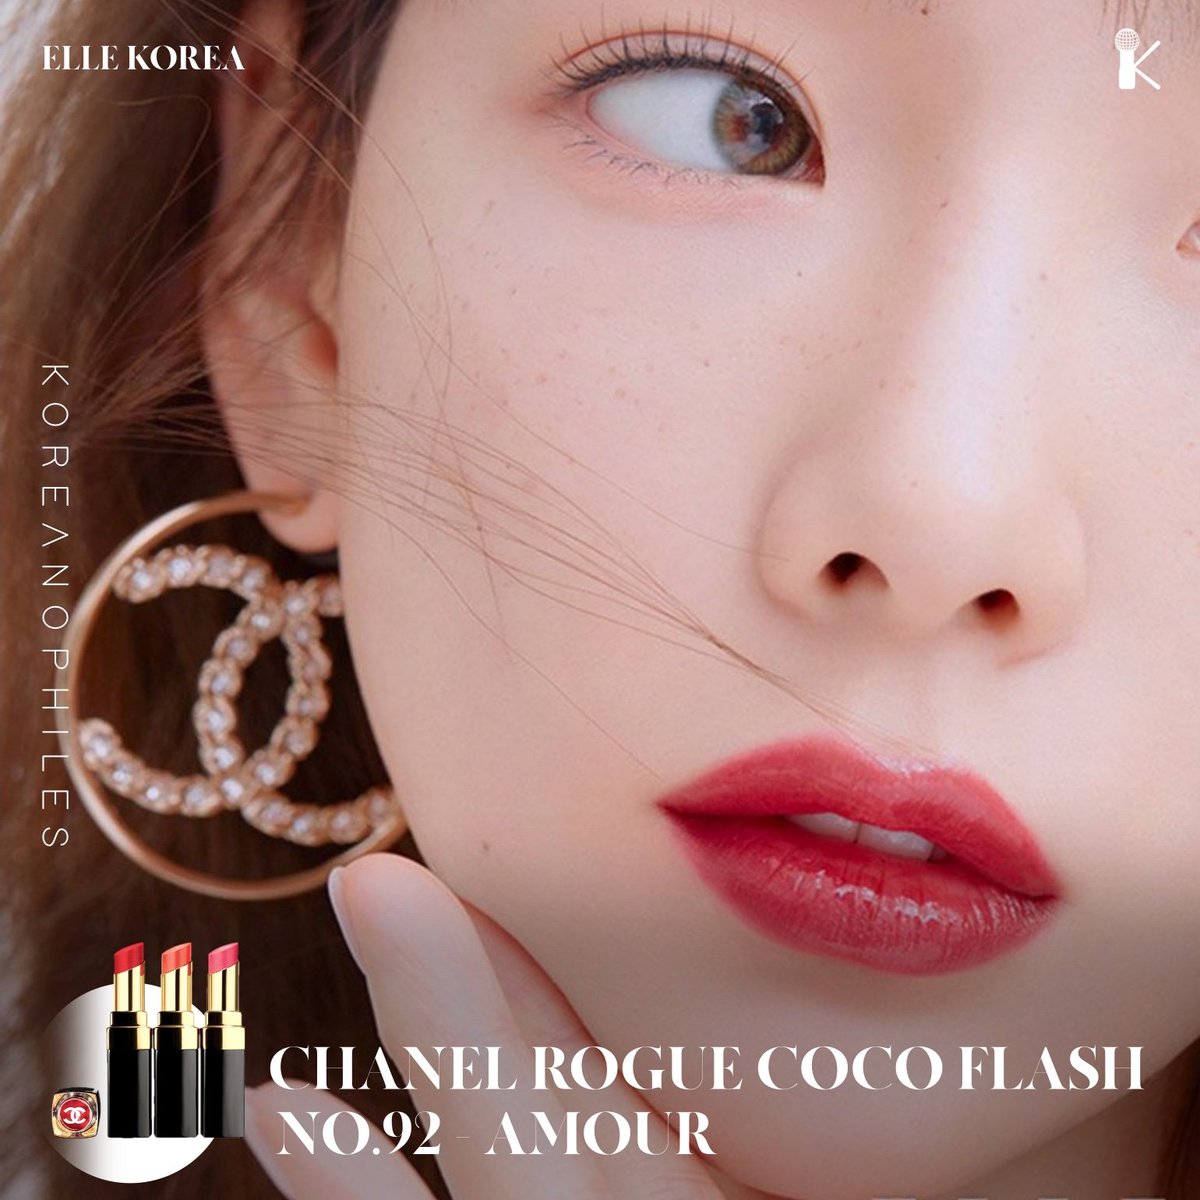 Chanel launches new additions to their Rouge Coco Flash - GLASS HK